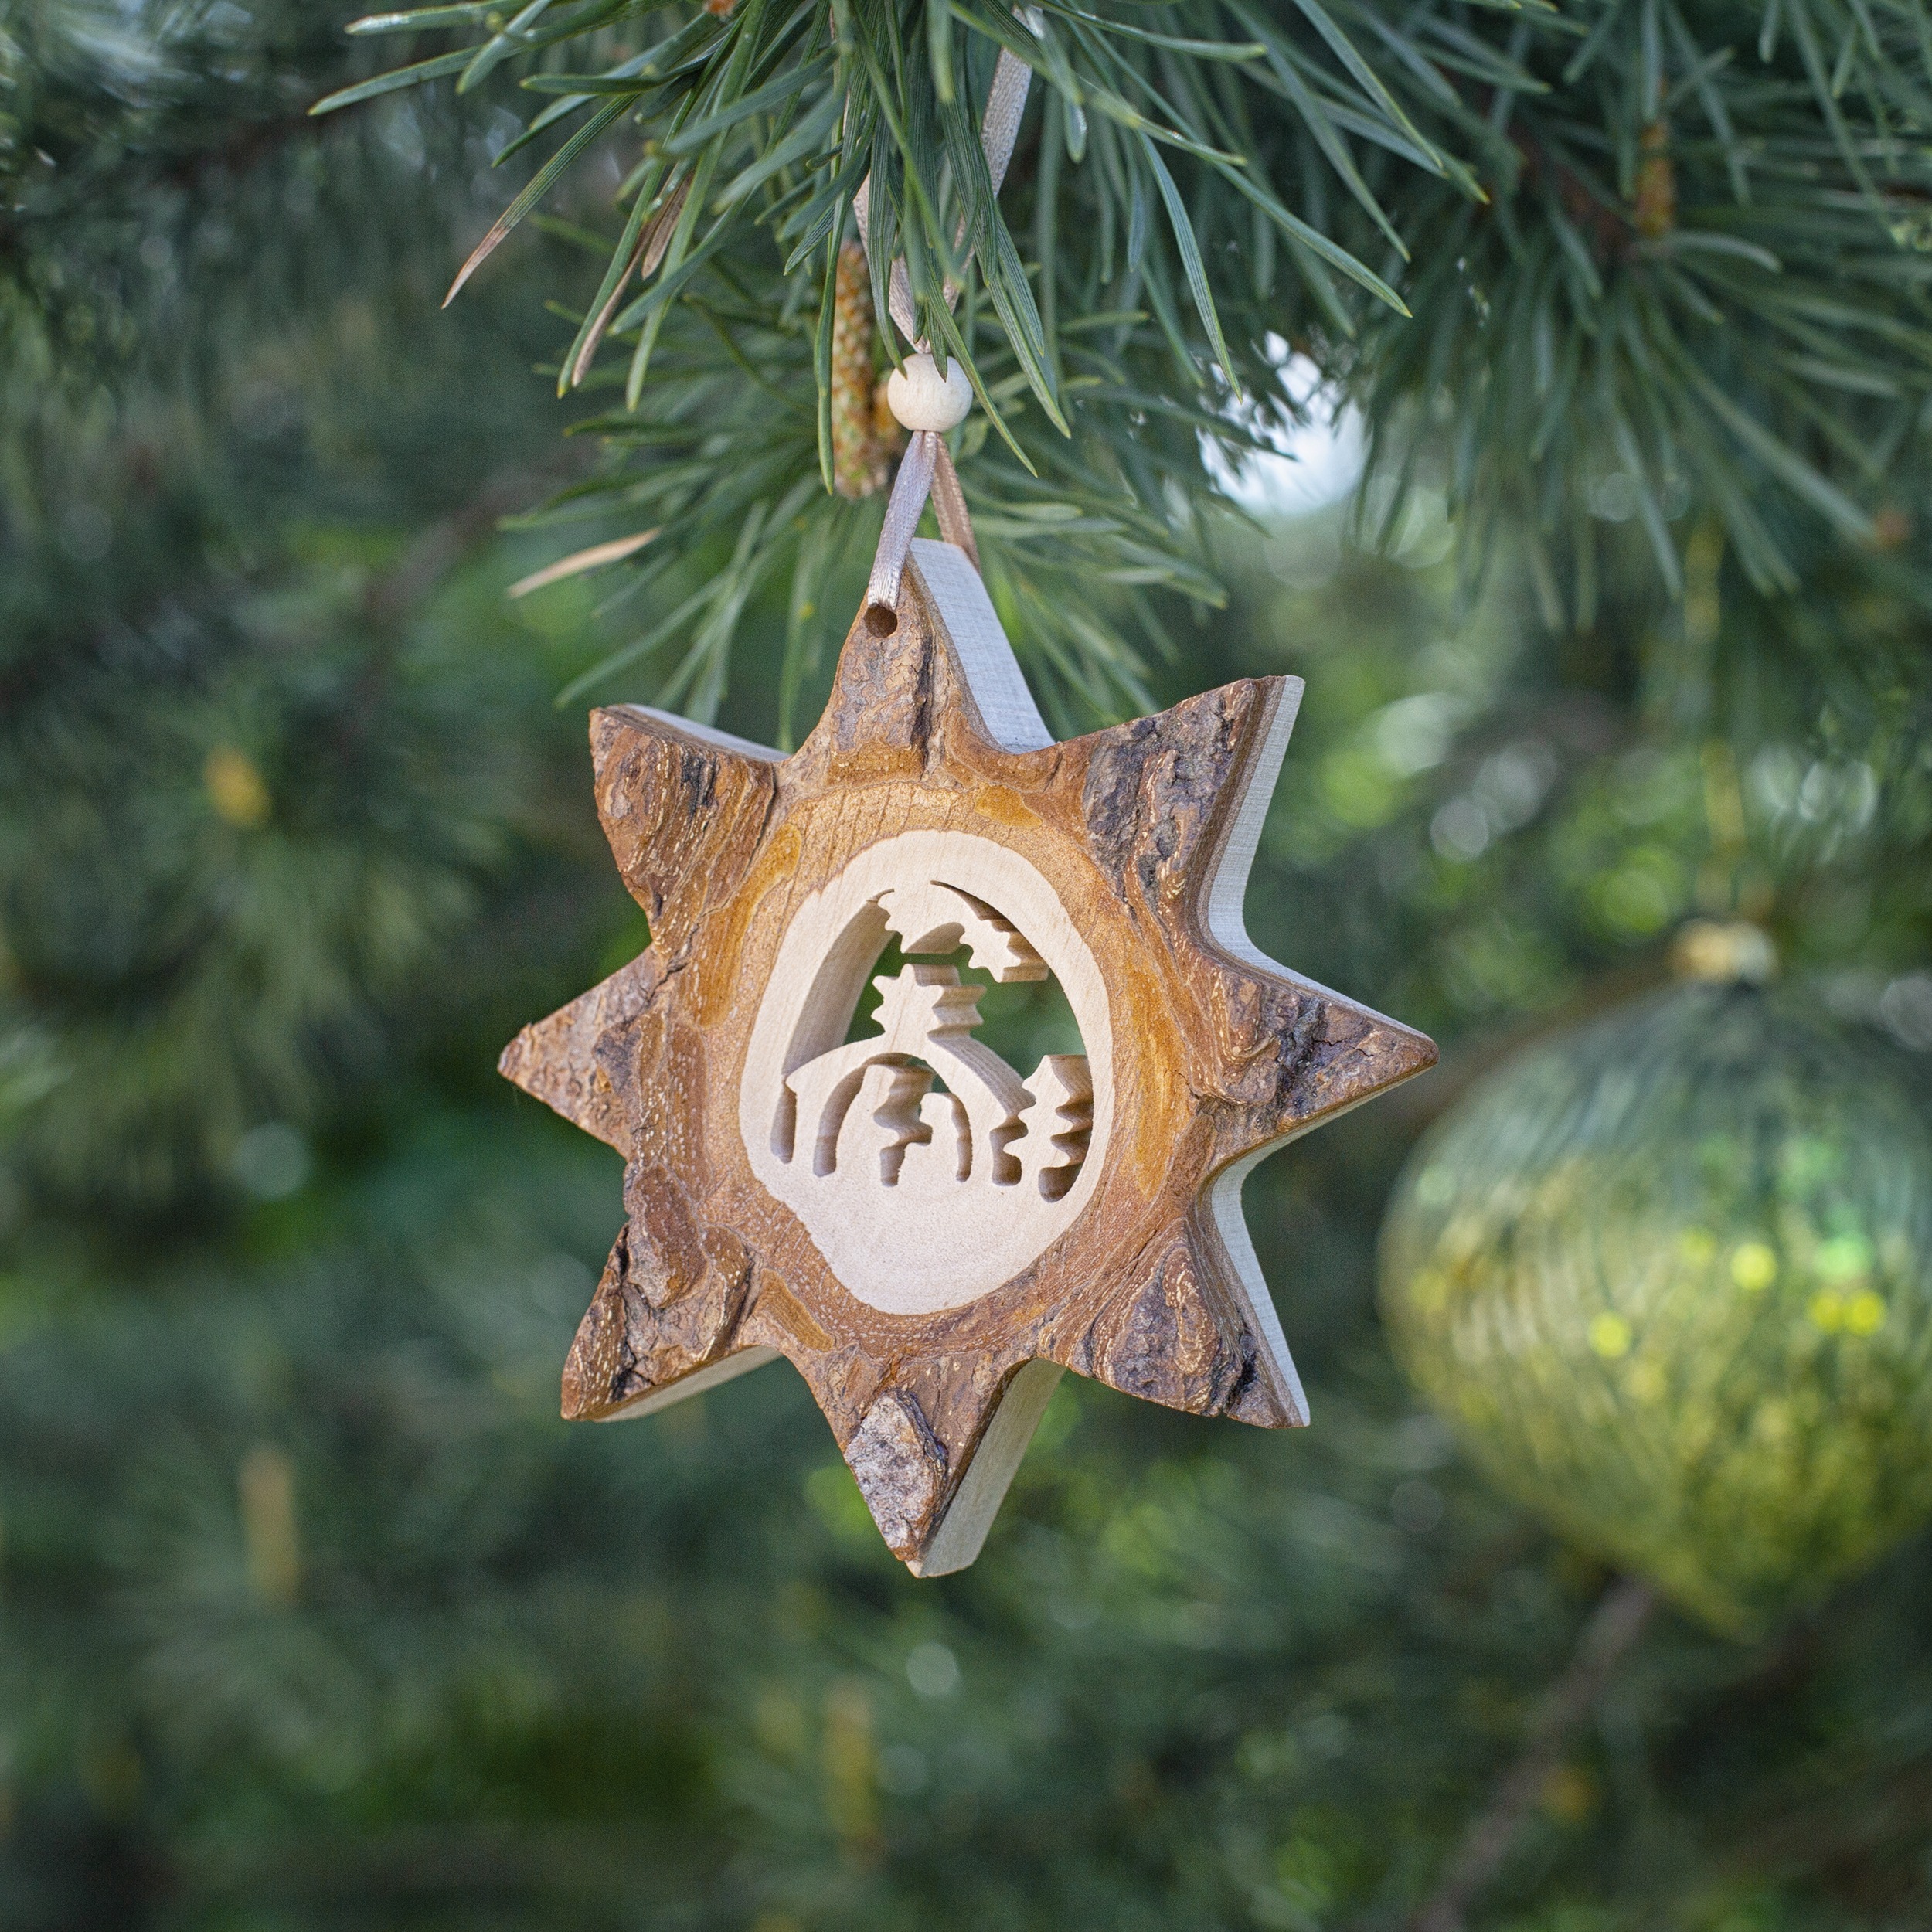 A wooden star ornament hangs on a christmas tree.